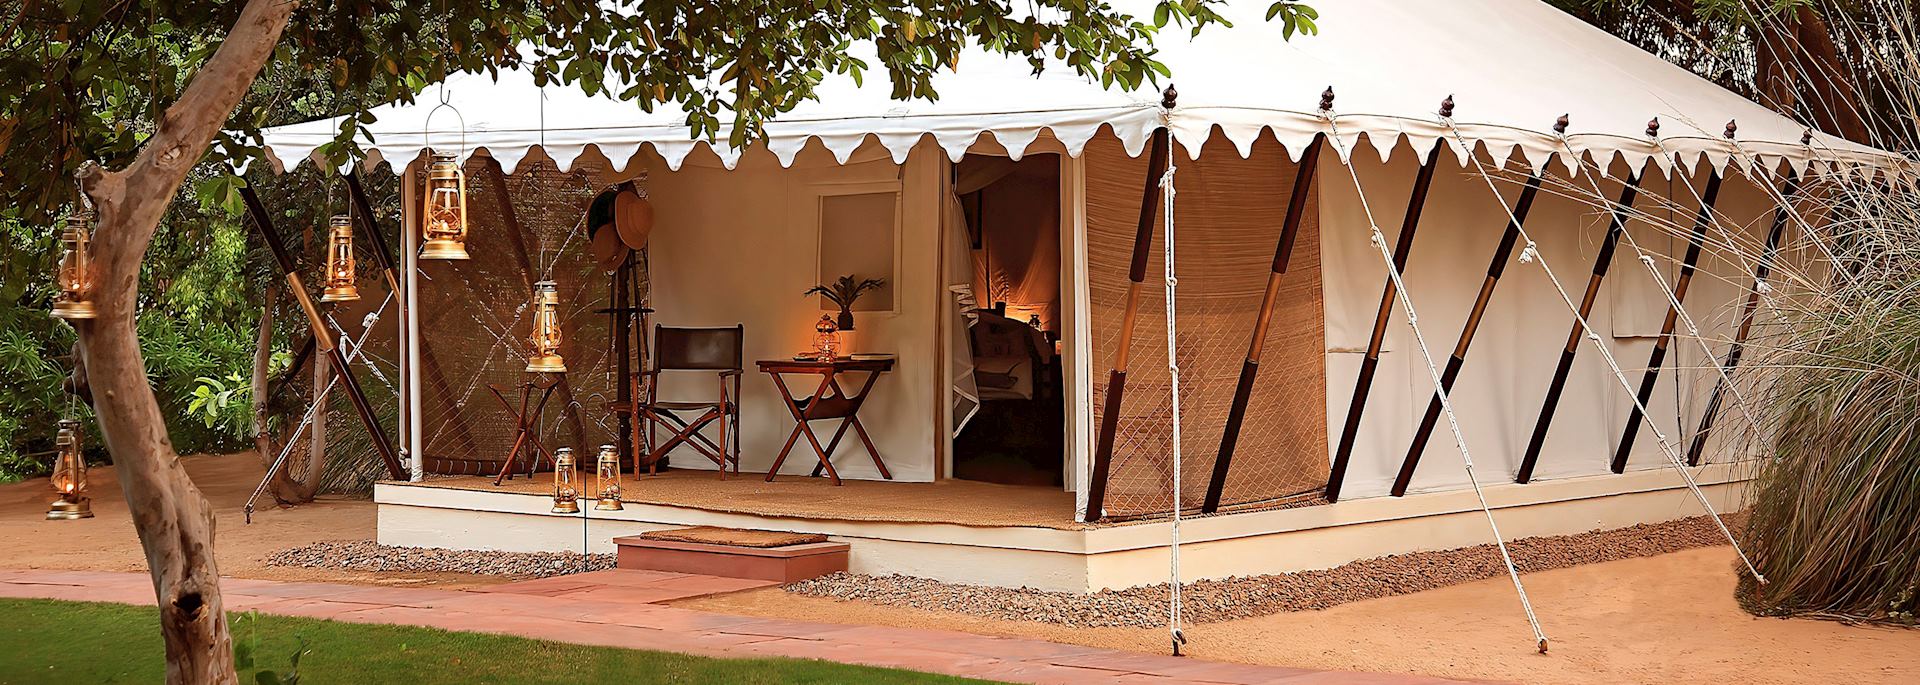 Luxury tent at Sher Bagh